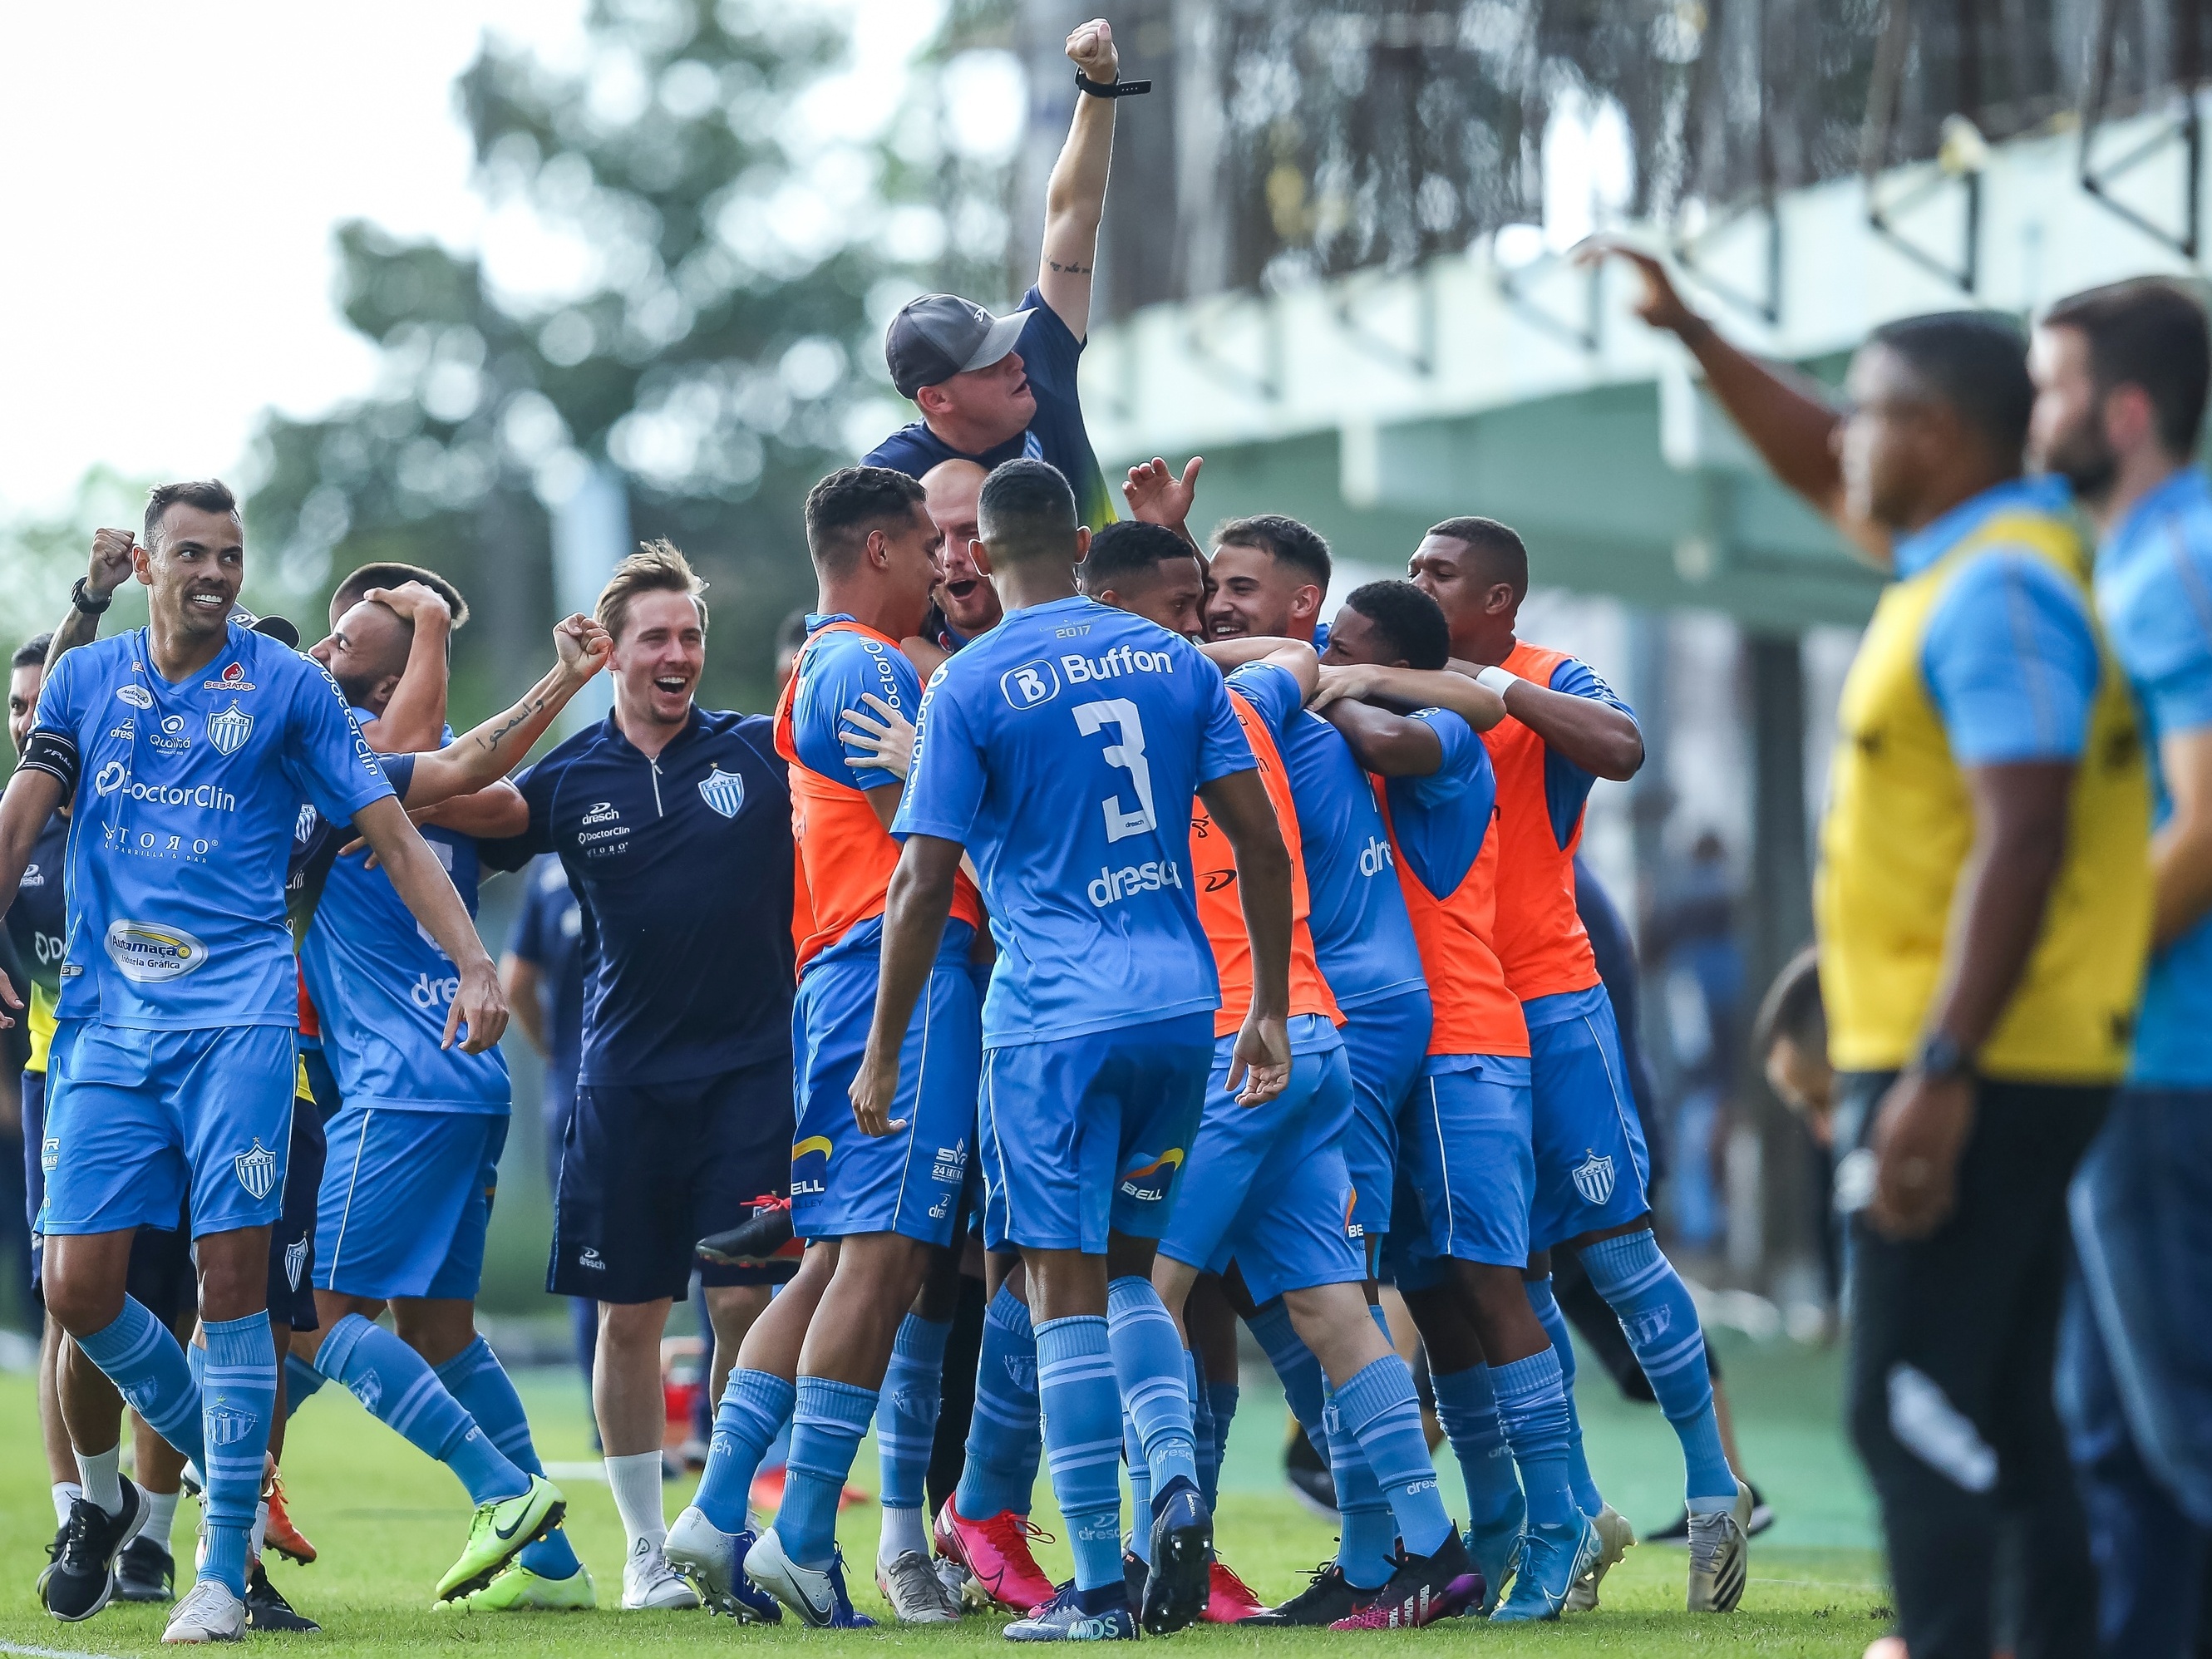 Cruzeiro vs Tombense: Exciting Clash Between the Giants and the Underdogs